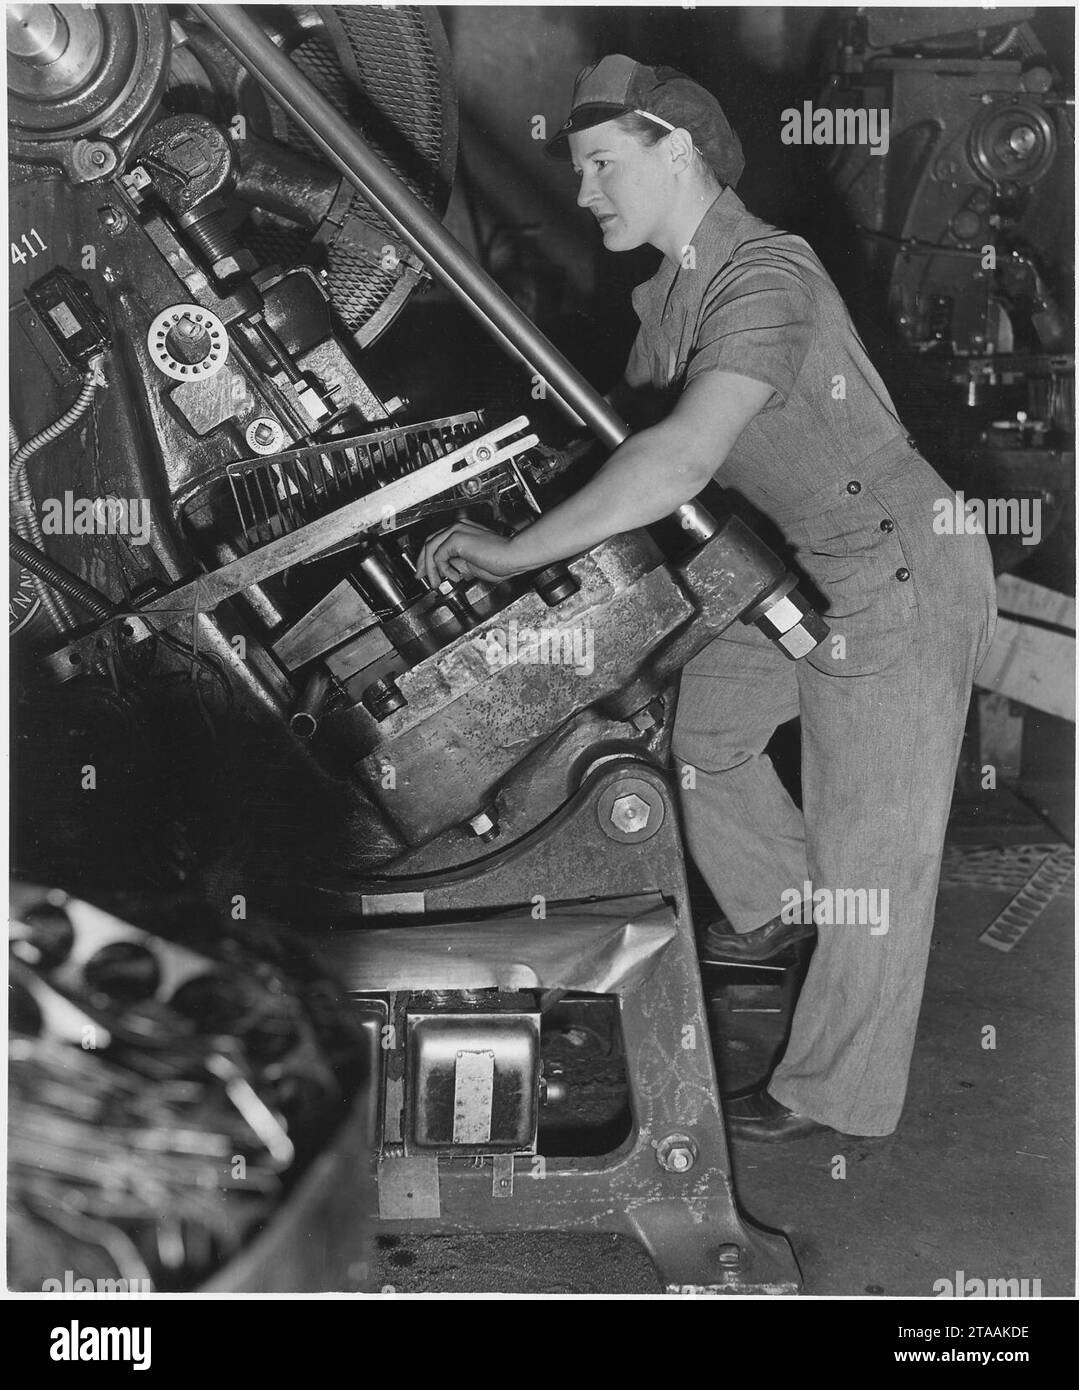 Virginia Ludwig goes to work on a punch press, stamping out discs from steel strips. Her well-fitting uniform is... Stock Photo